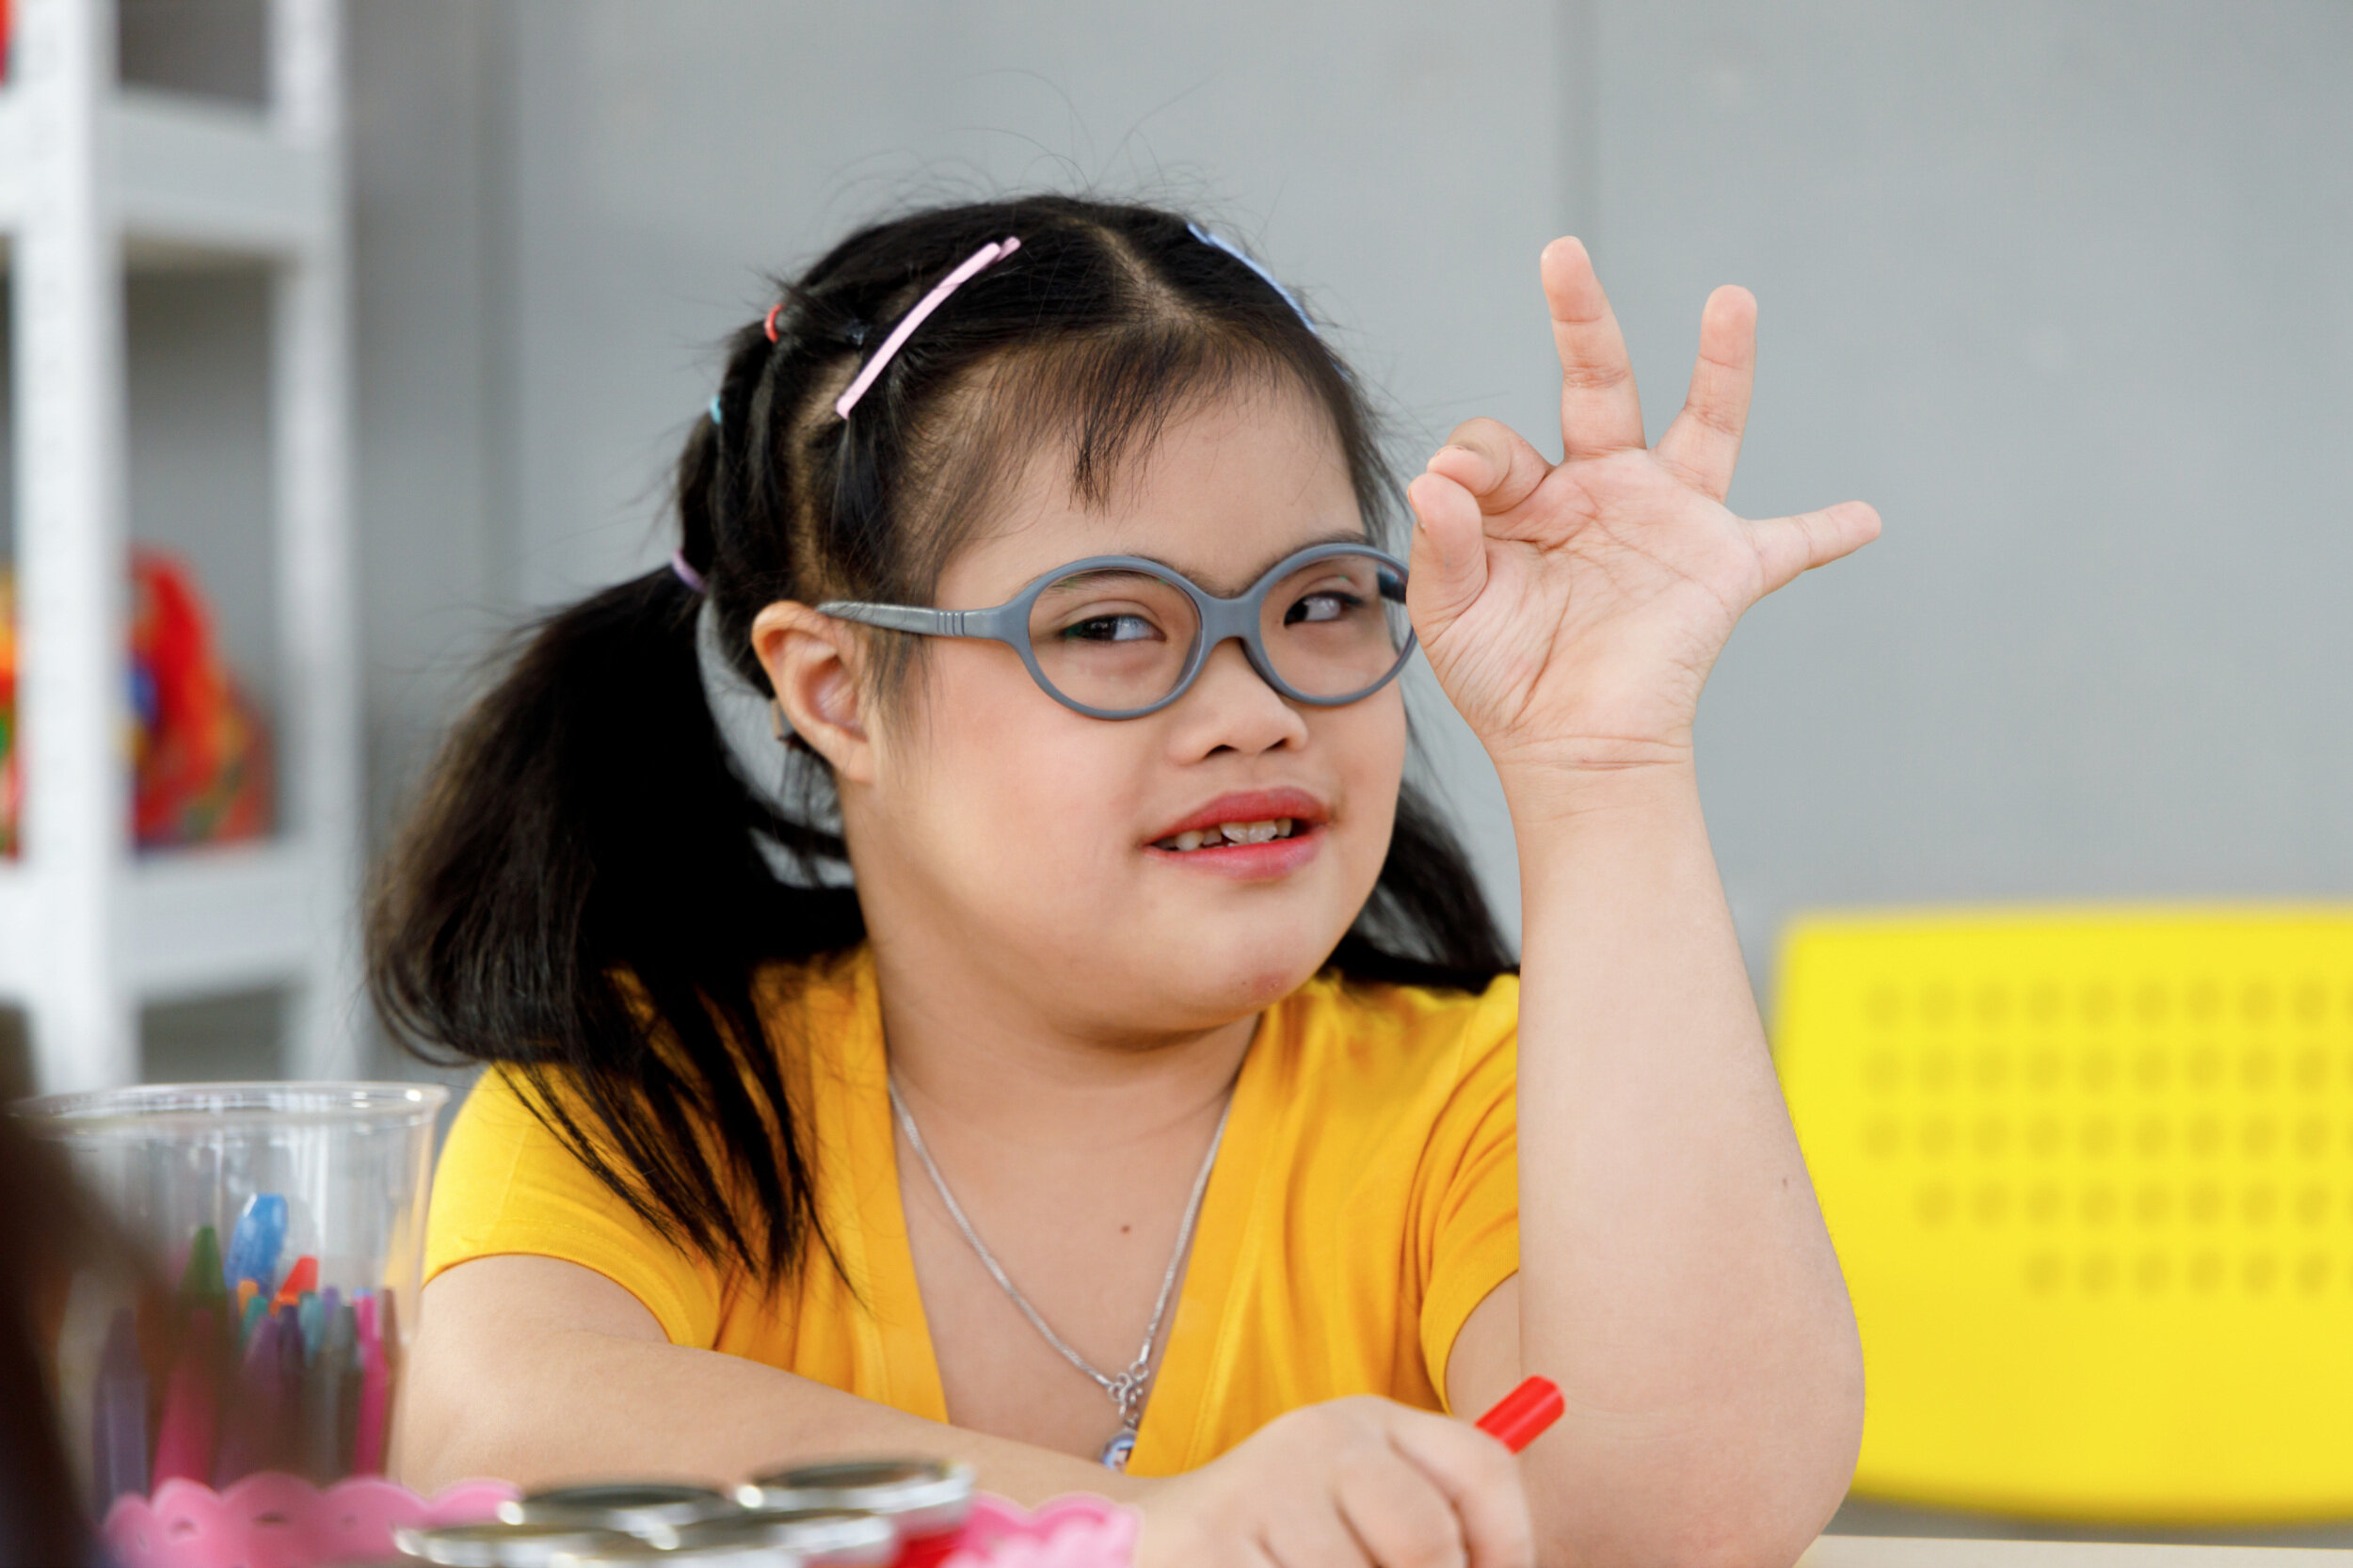 Down Syndrome and Autism Intersect